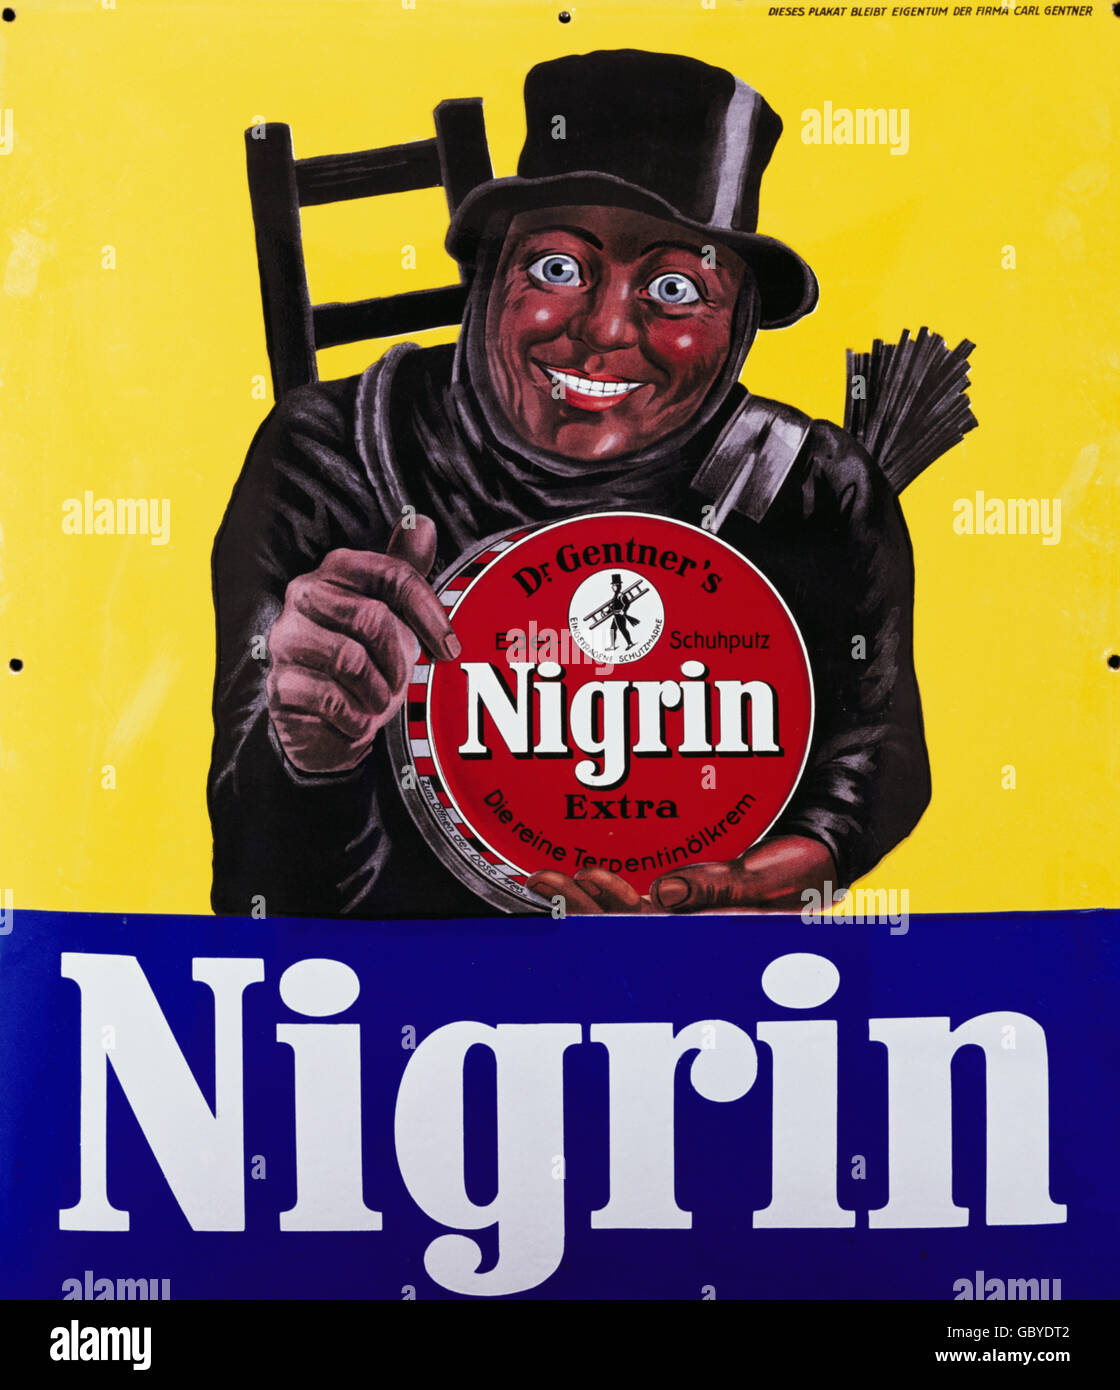 advertising, shoe polish, Nigrin, Dr. Gentner's Edel Schuhputz, enamel plate, Germany, circa 1905, Additional-Rights-Clearences-Not Available Stock Photo